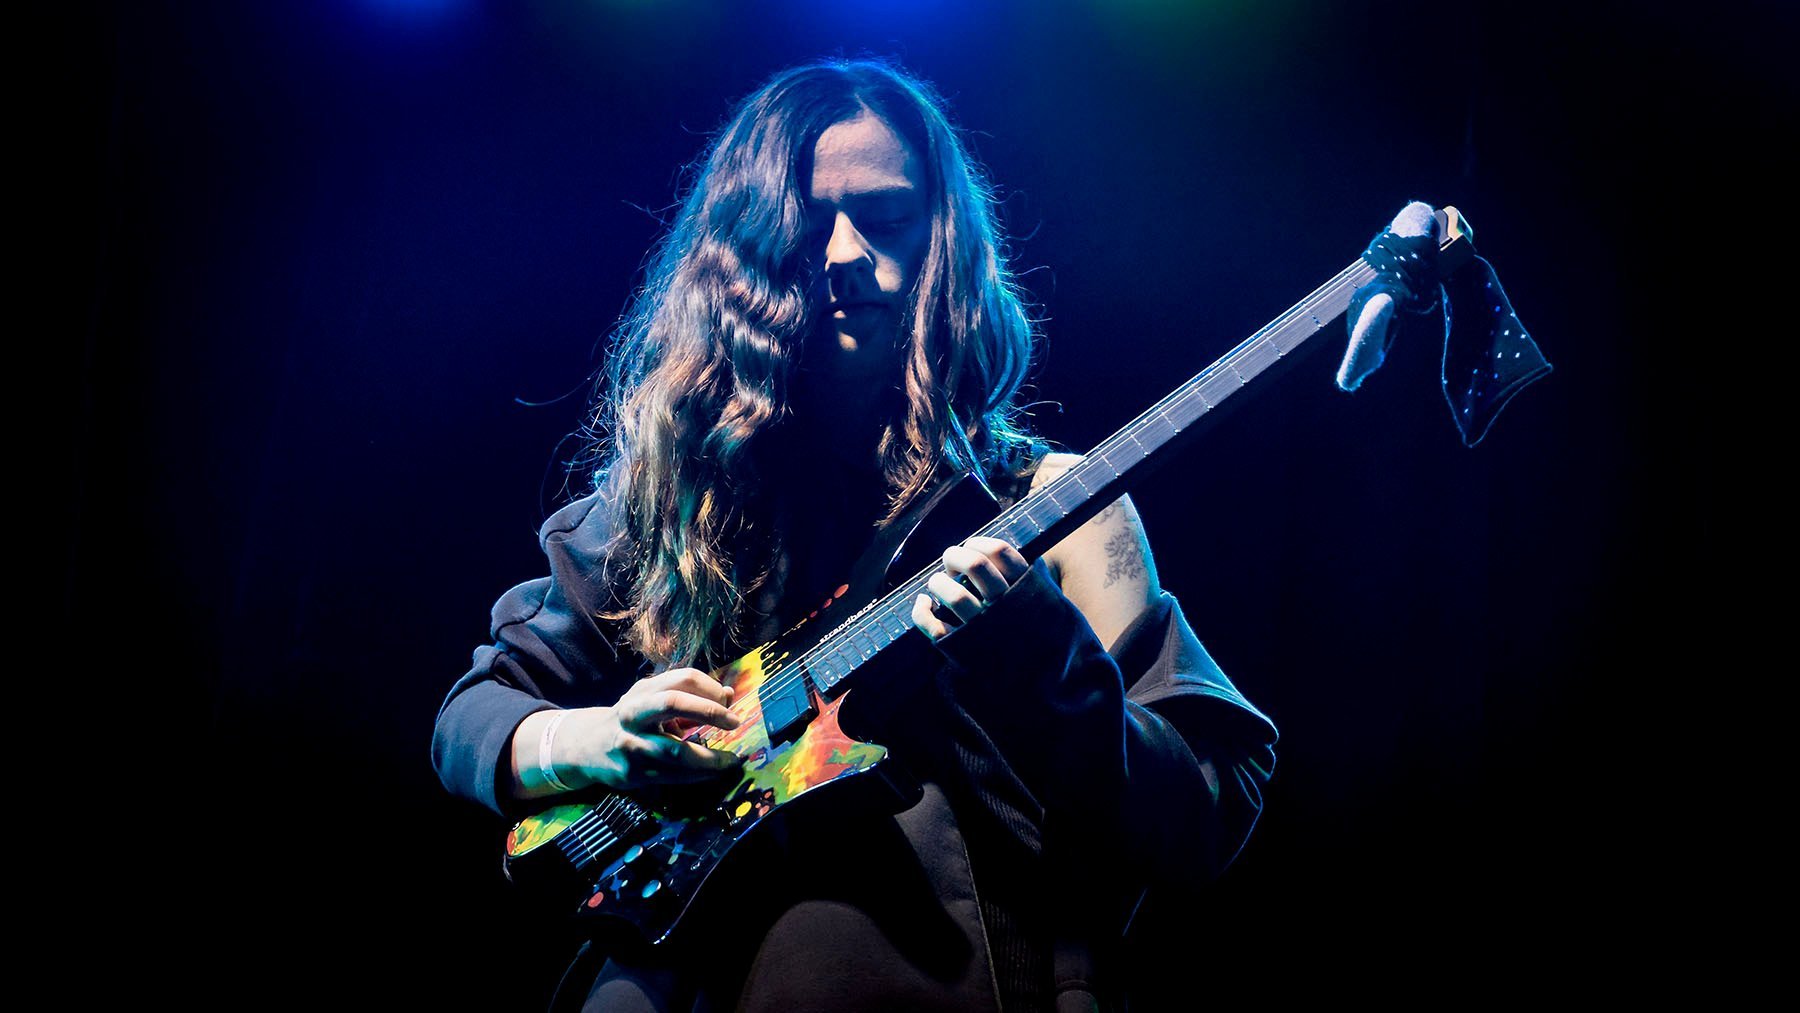 Sara Longfield on stage with her signature headless guitar